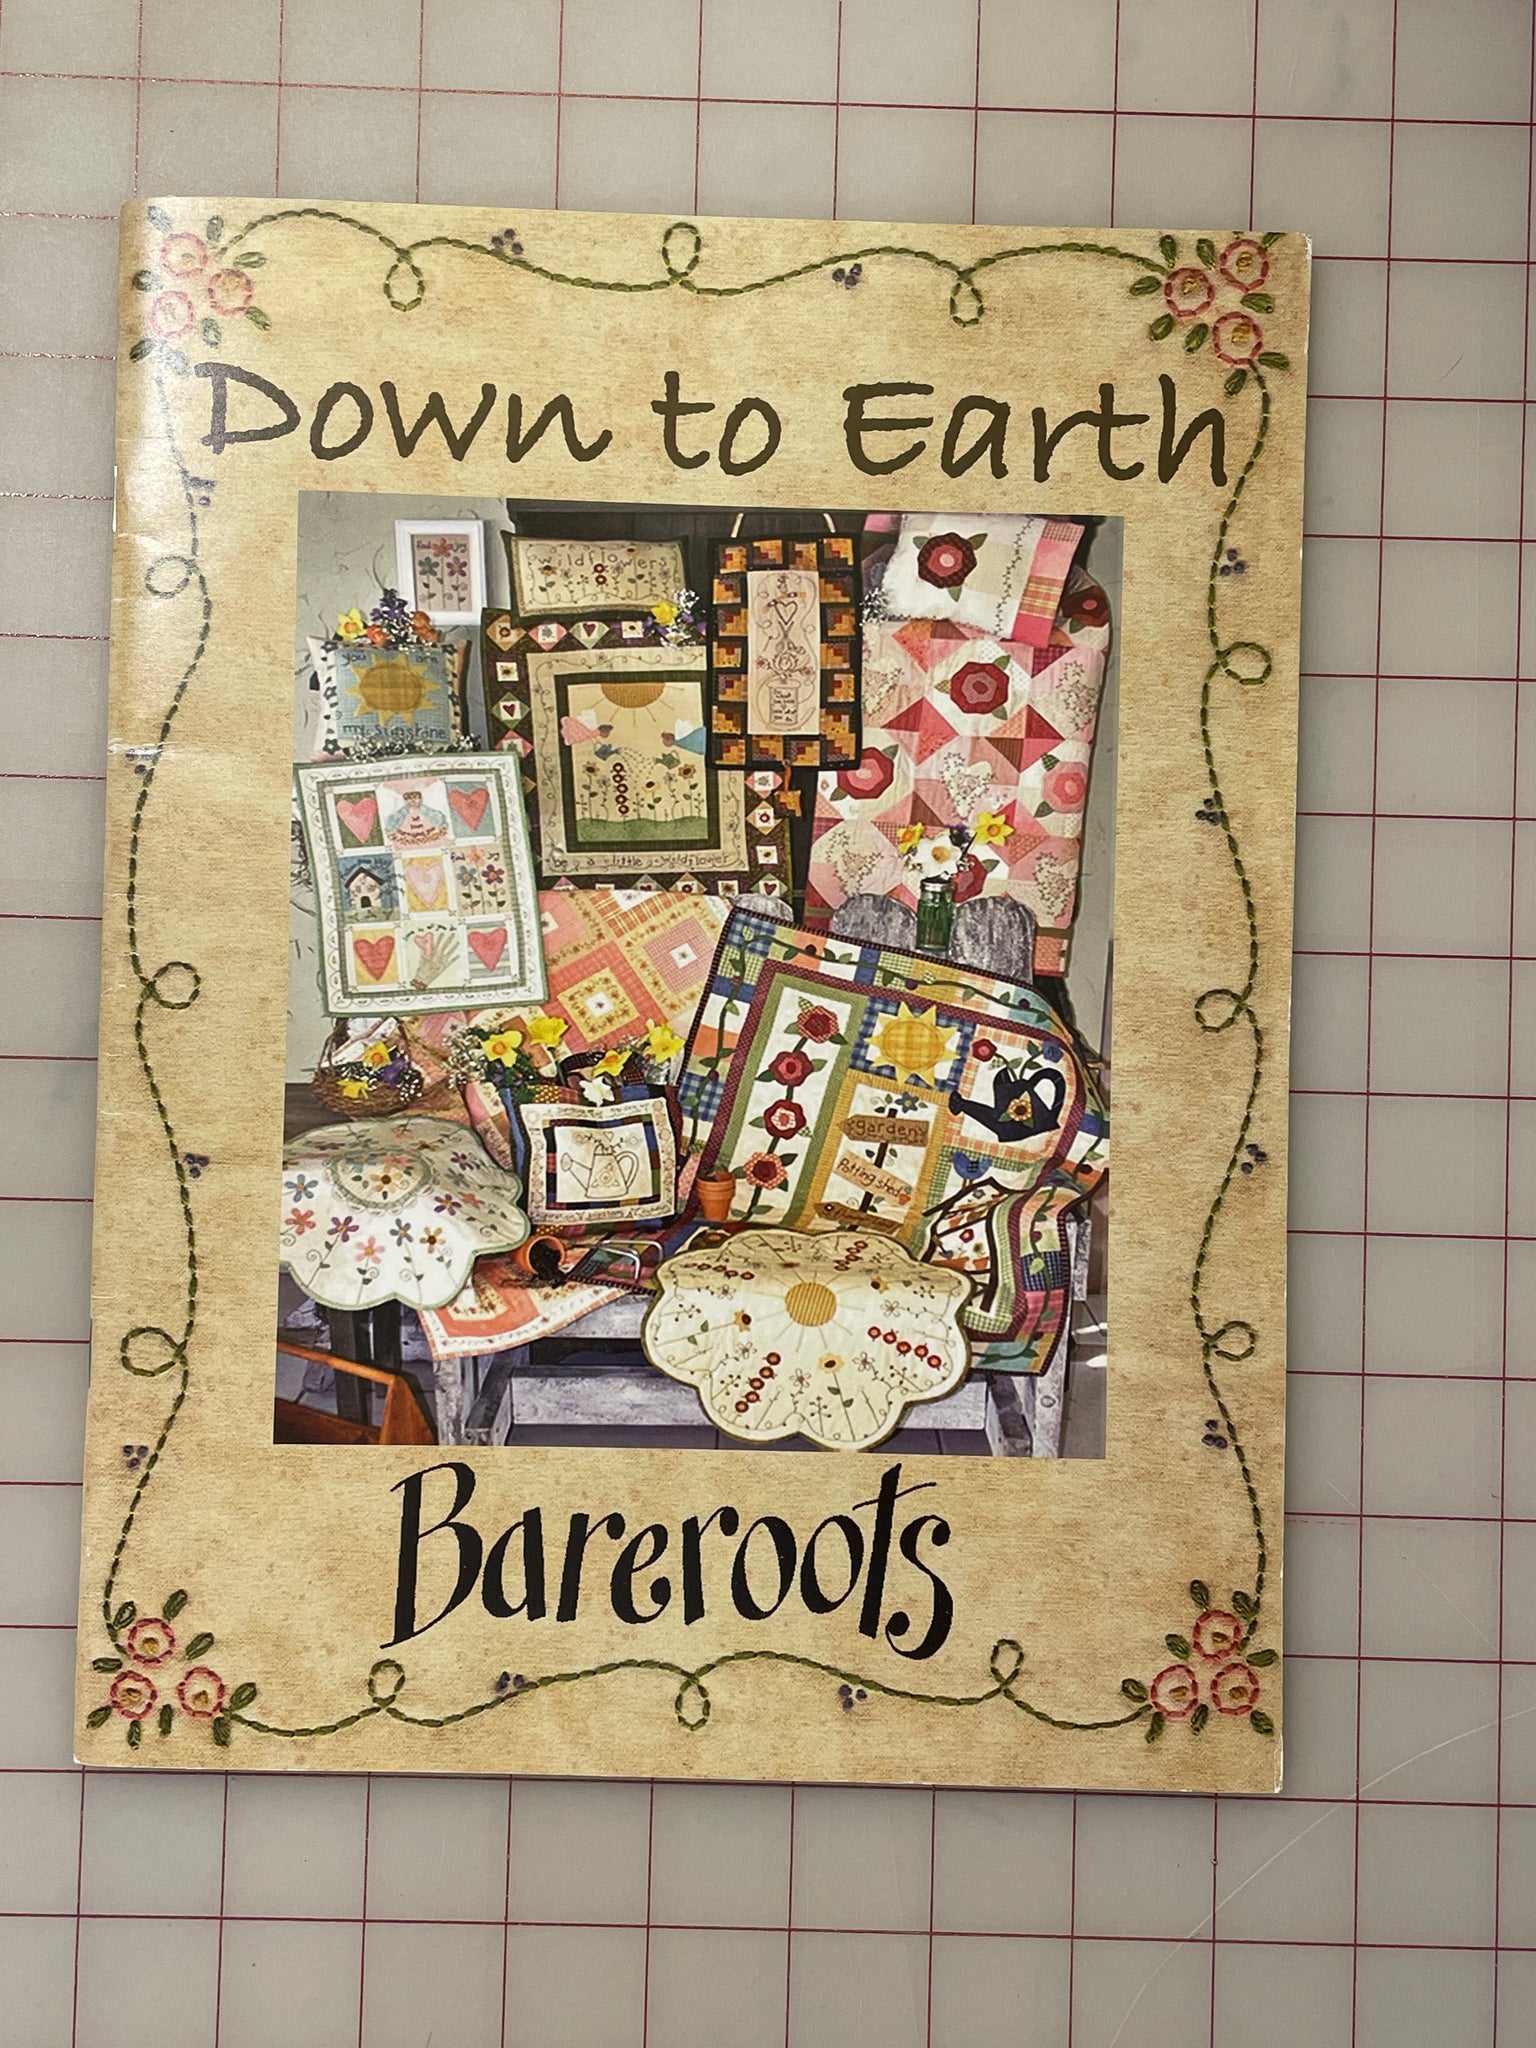 2006 Quilting Book - "Down to Earth"